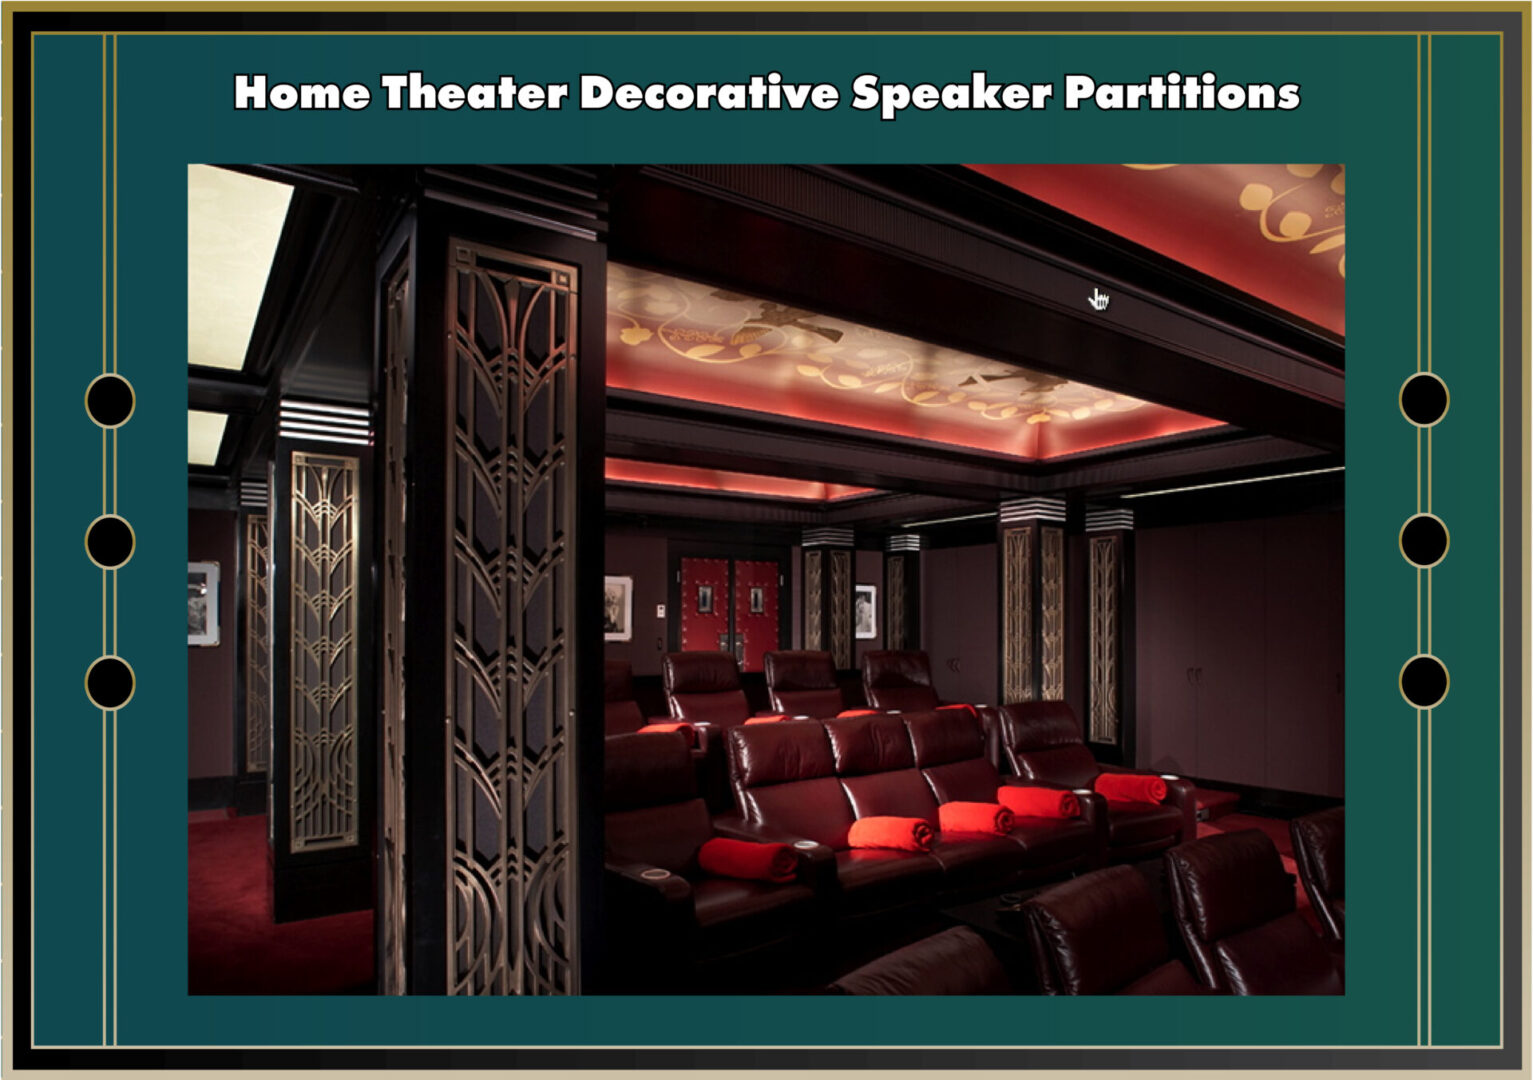 Home Theater Decorative Speaker Partitions